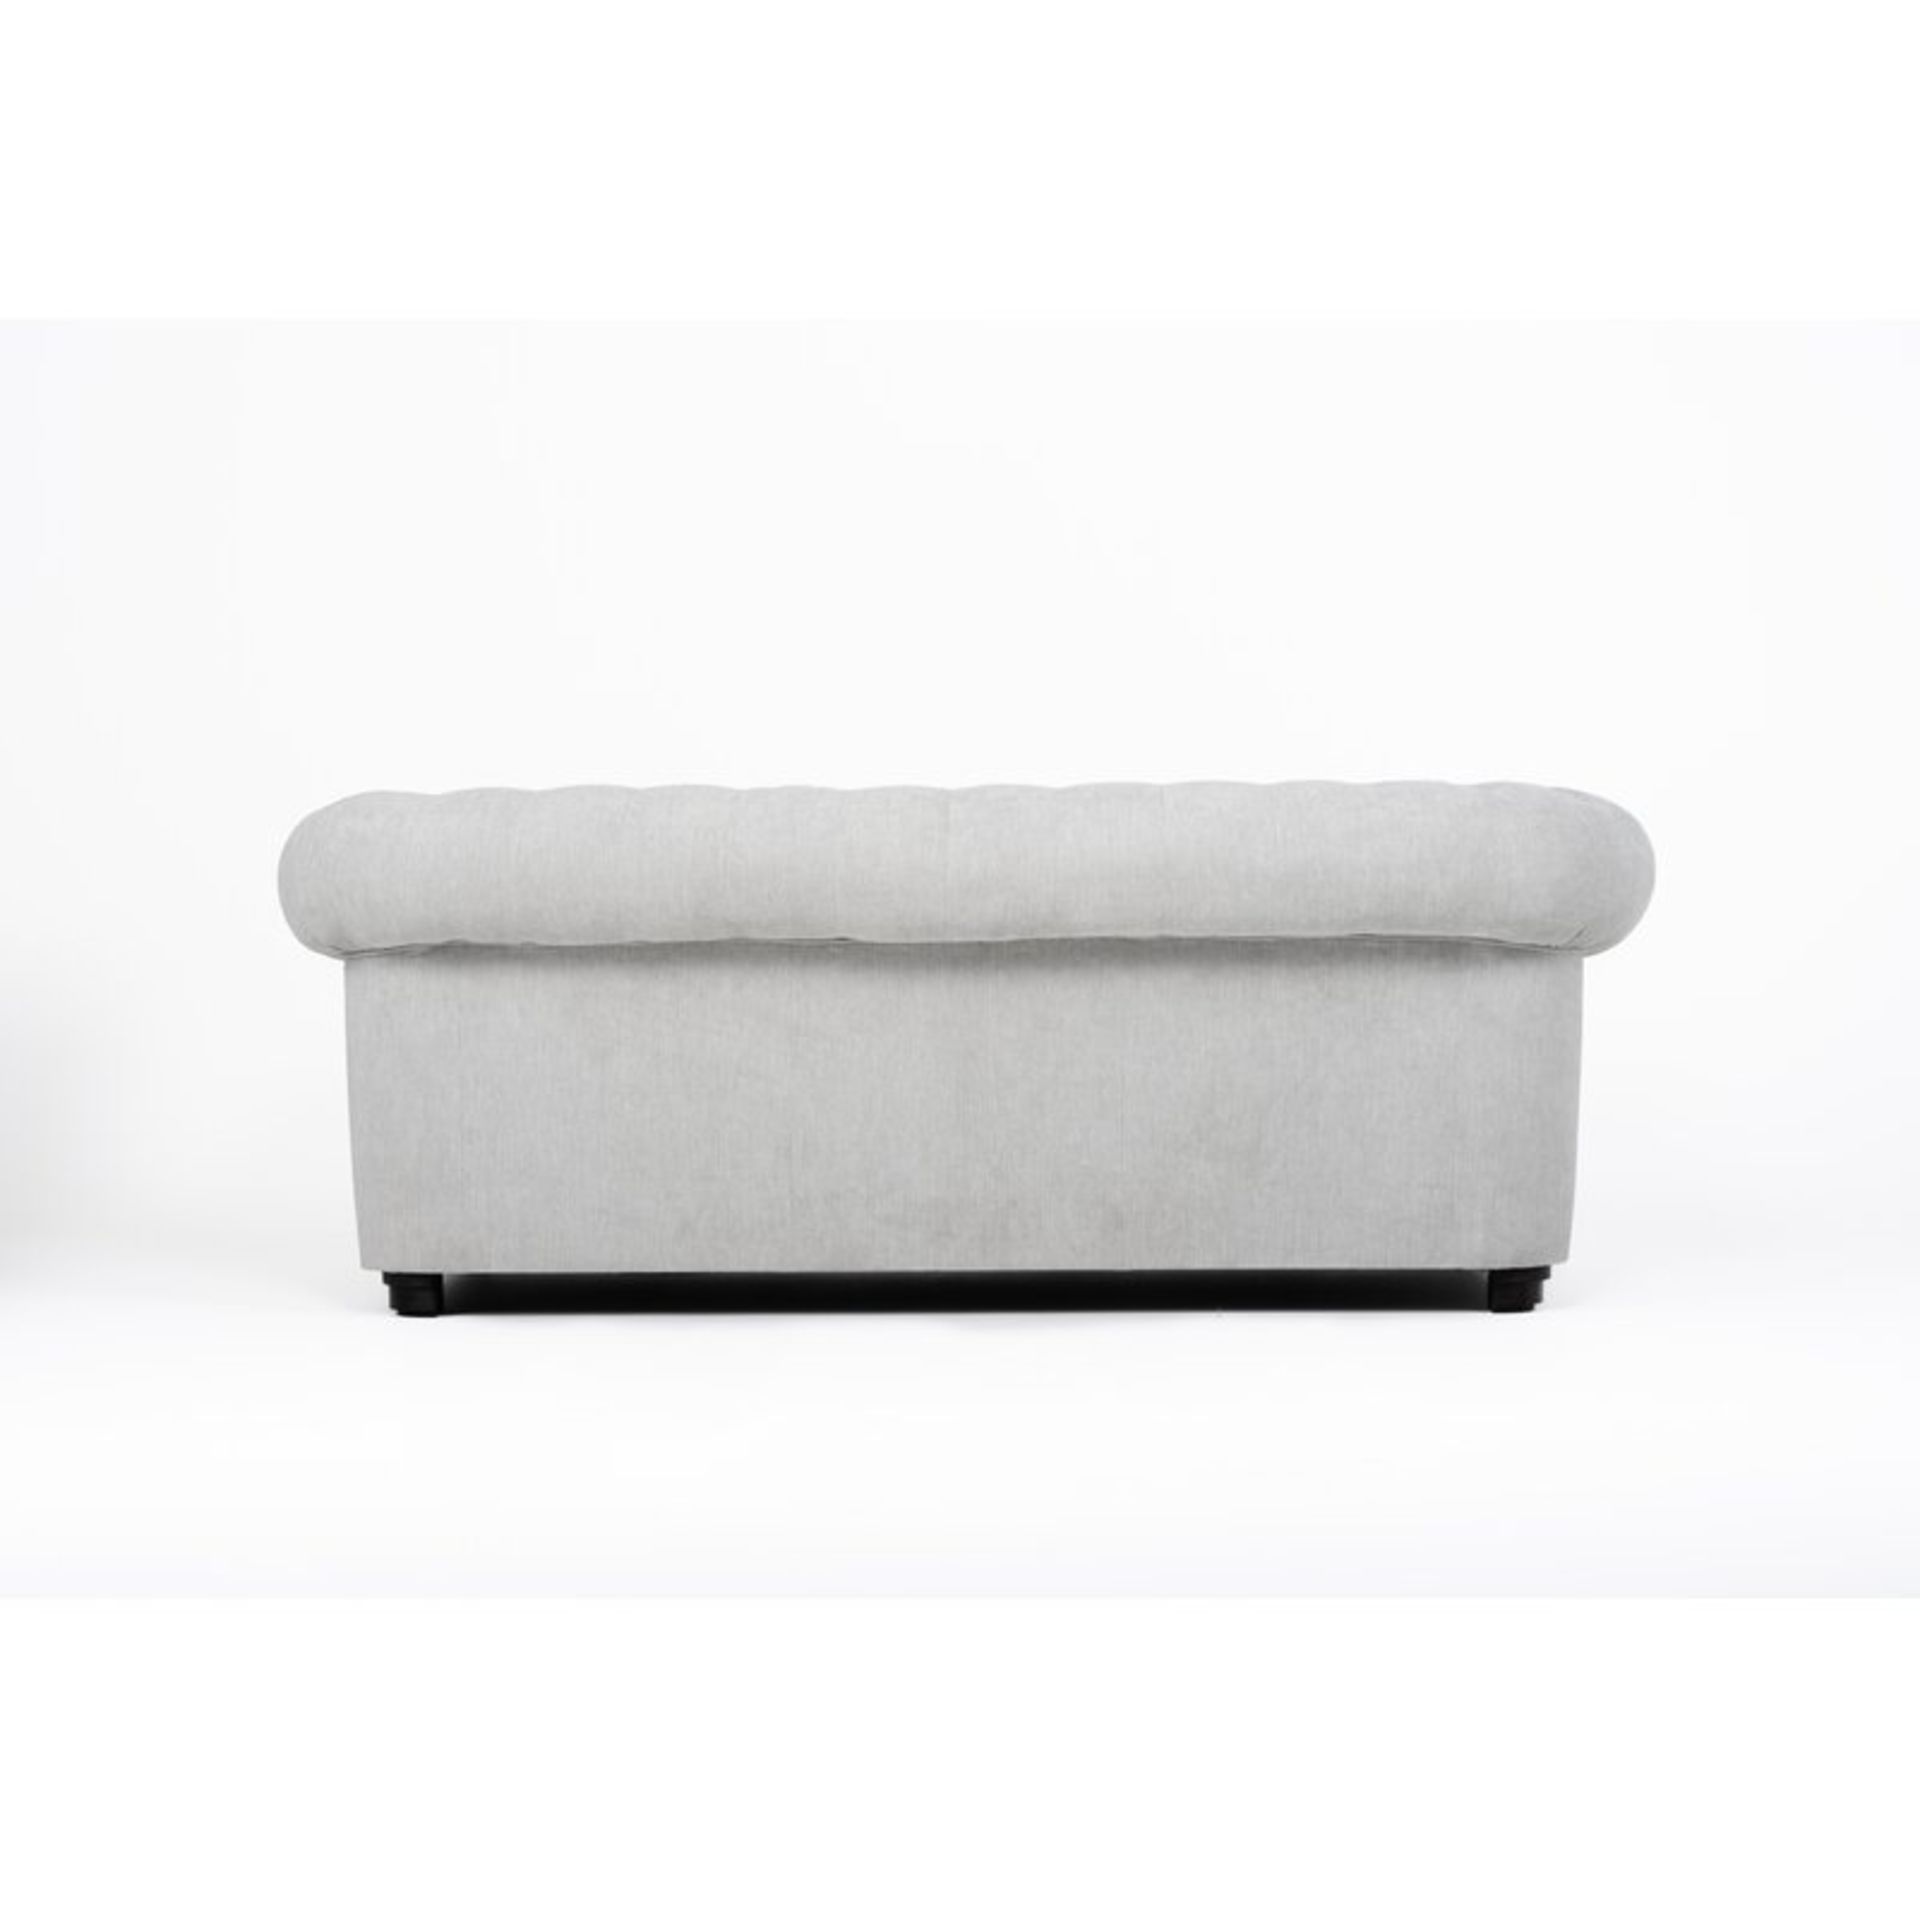 Alderwood 3 Seater Sofa Bed - RRP £769.99. COLLECTION OR LOCAL DELIVERY ONLY FOR £10 - Image 4 of 5